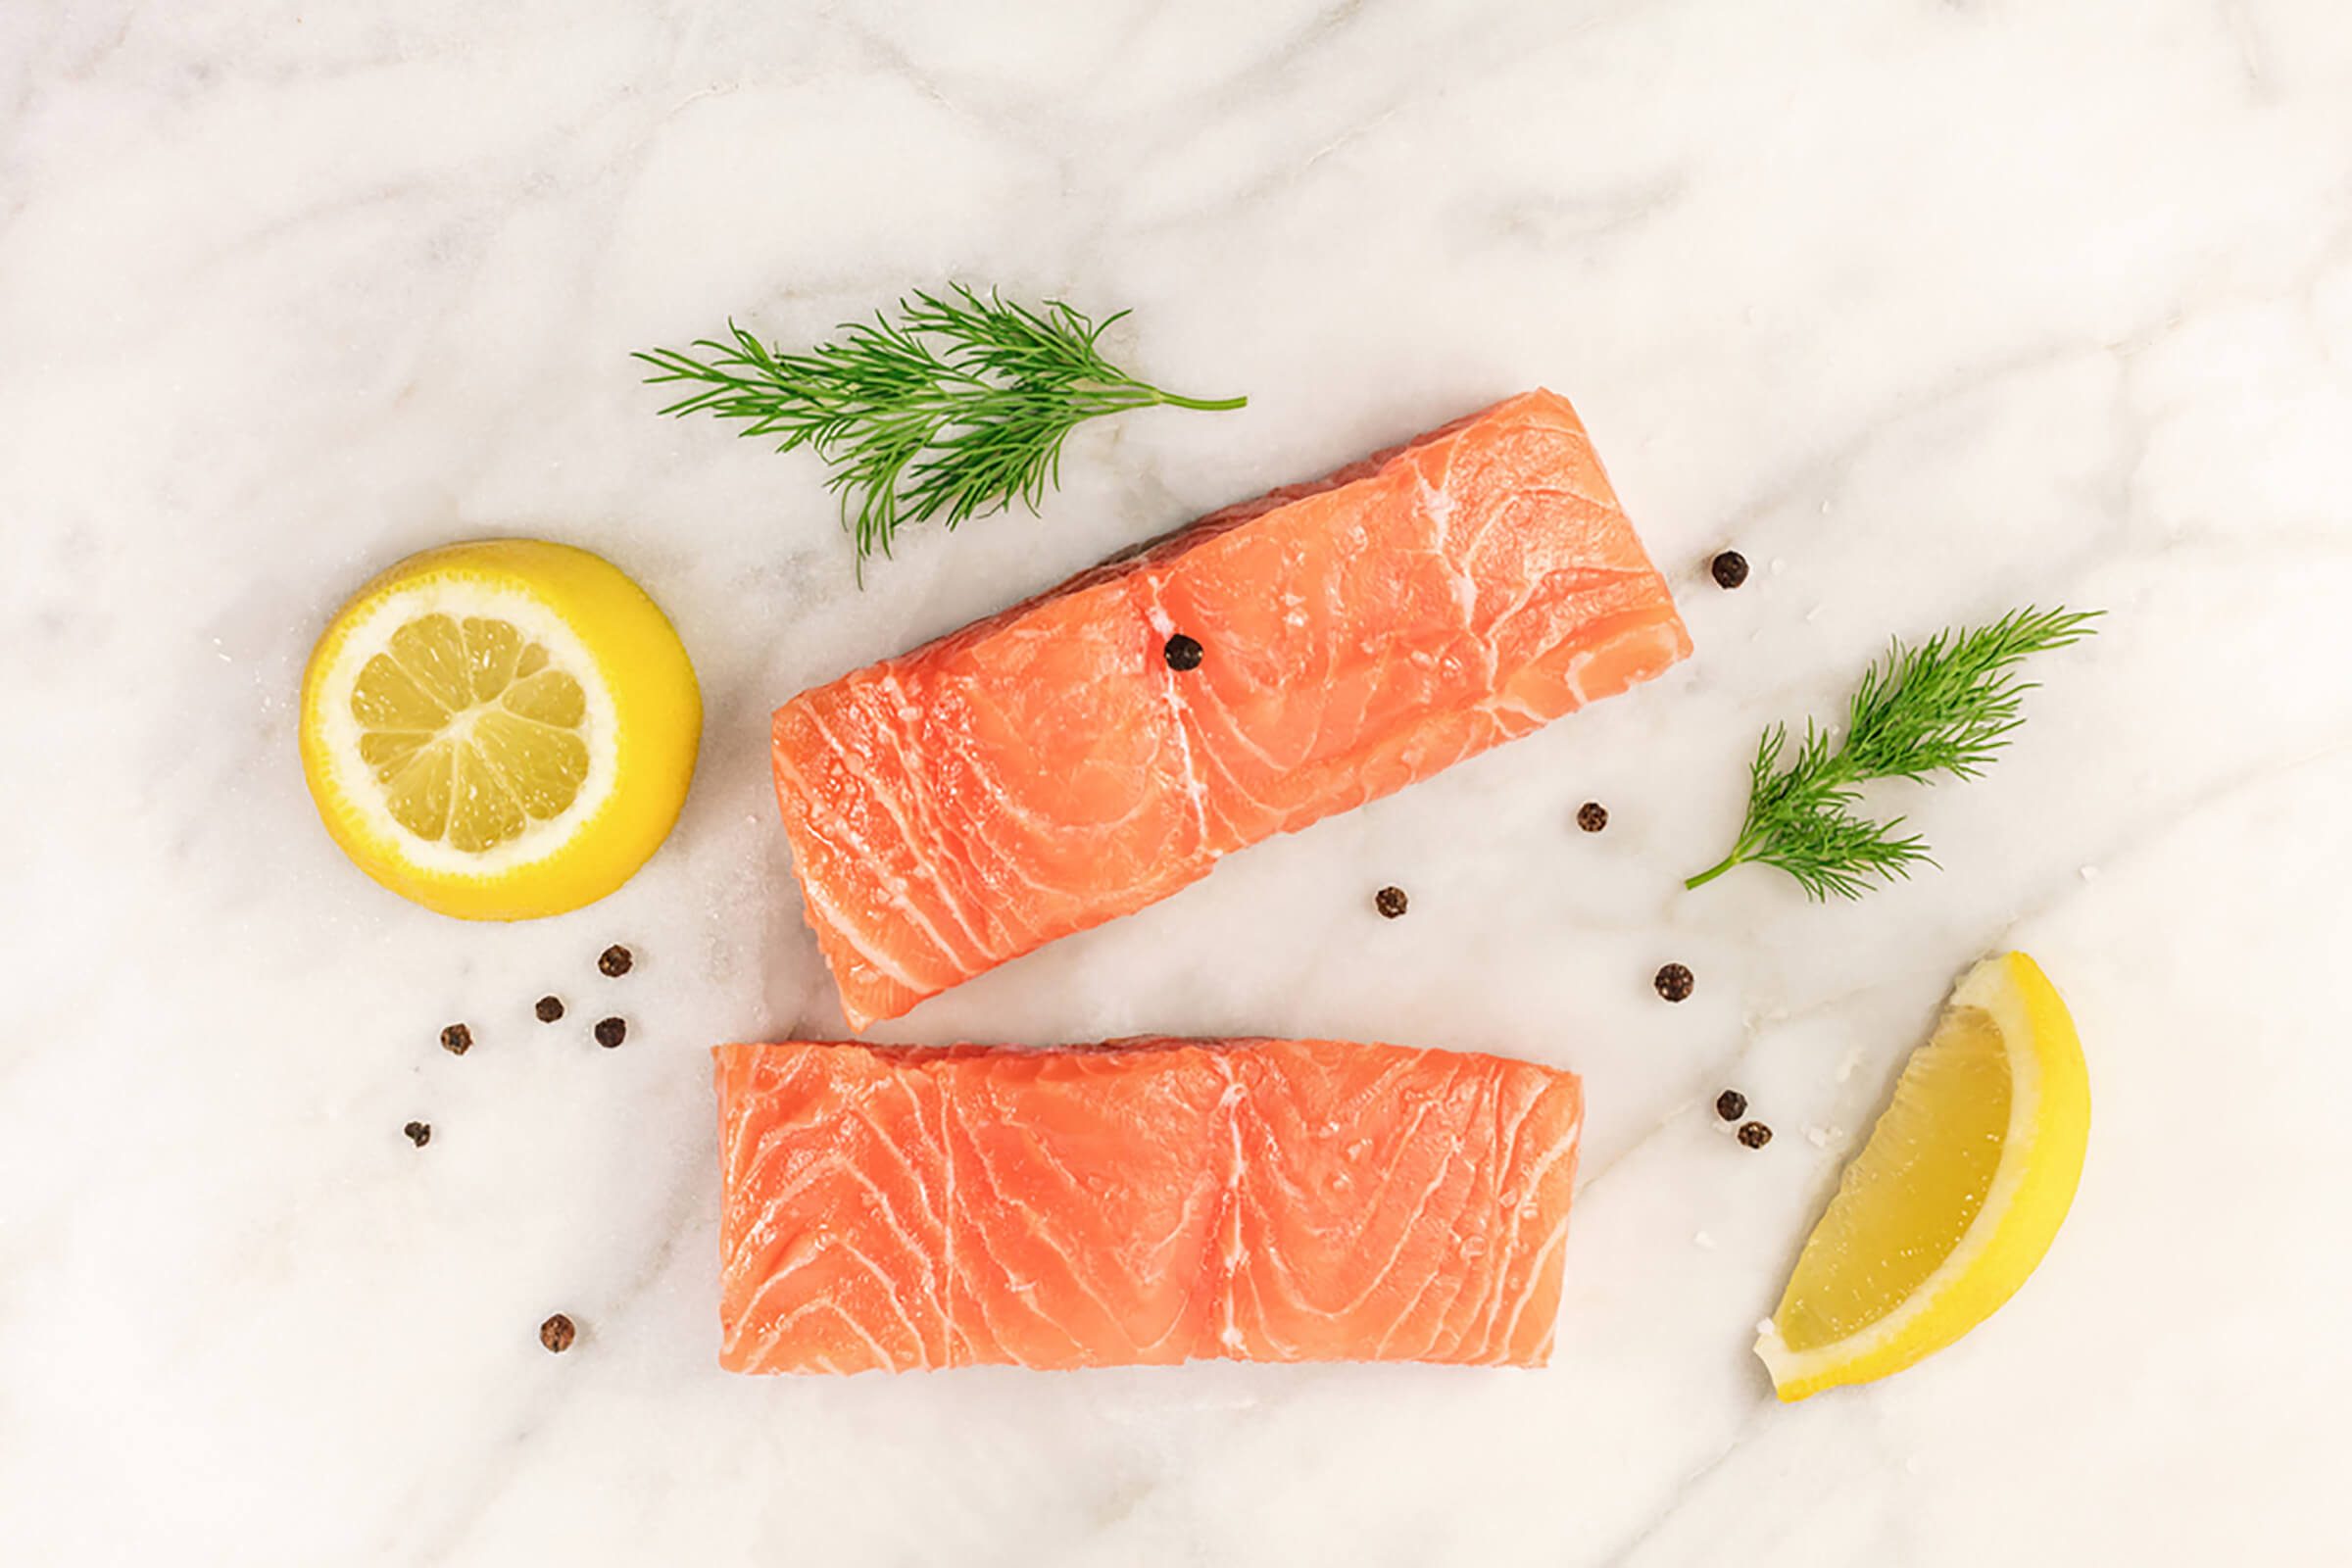 Salmon; countries with lowest heart disease